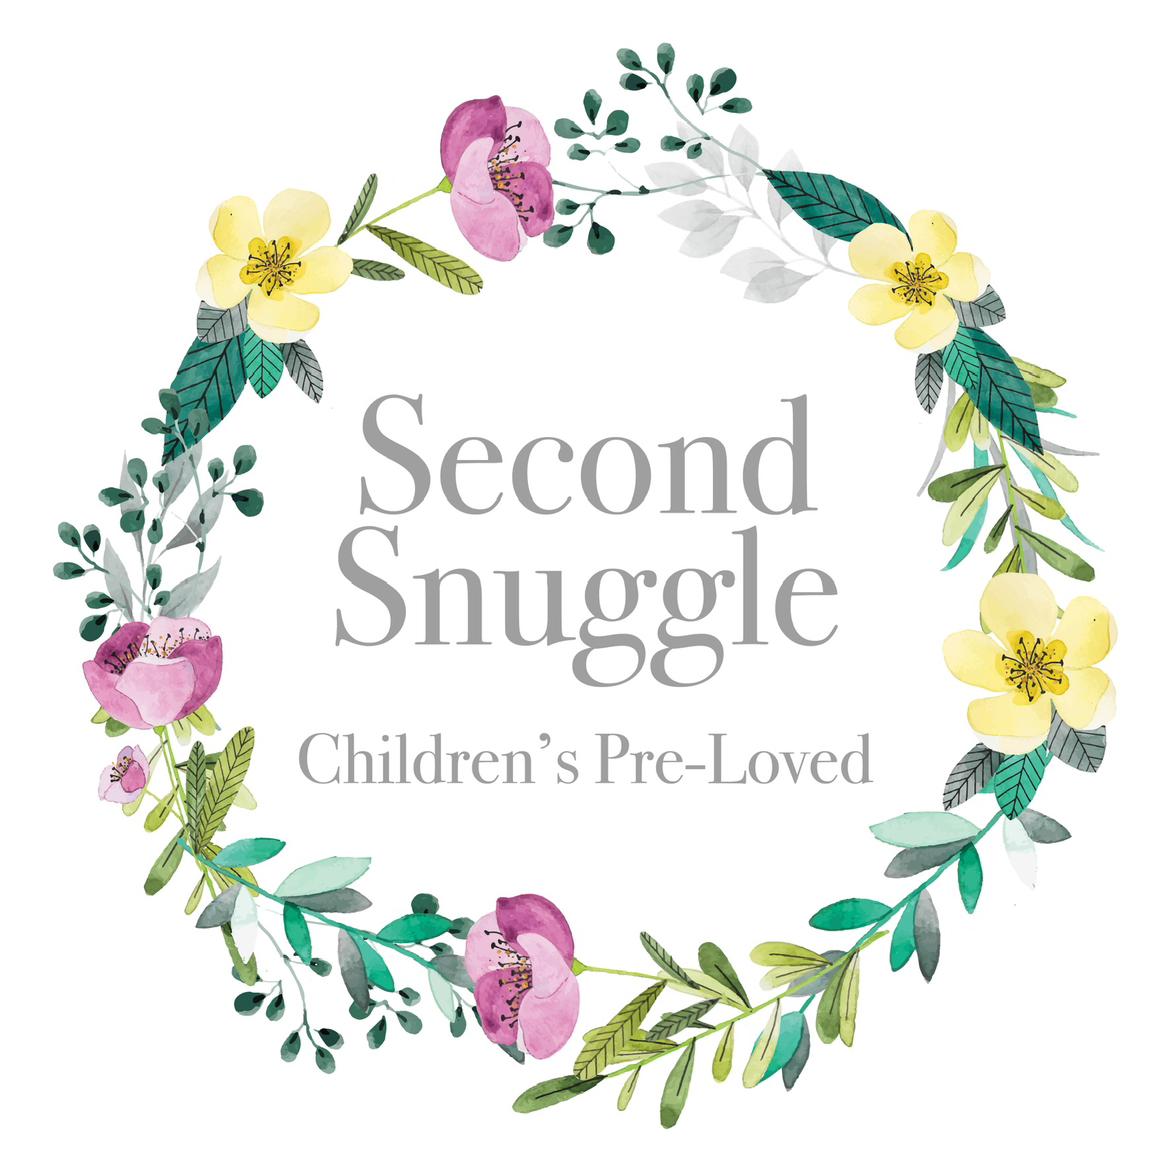 Second.snuggle's images